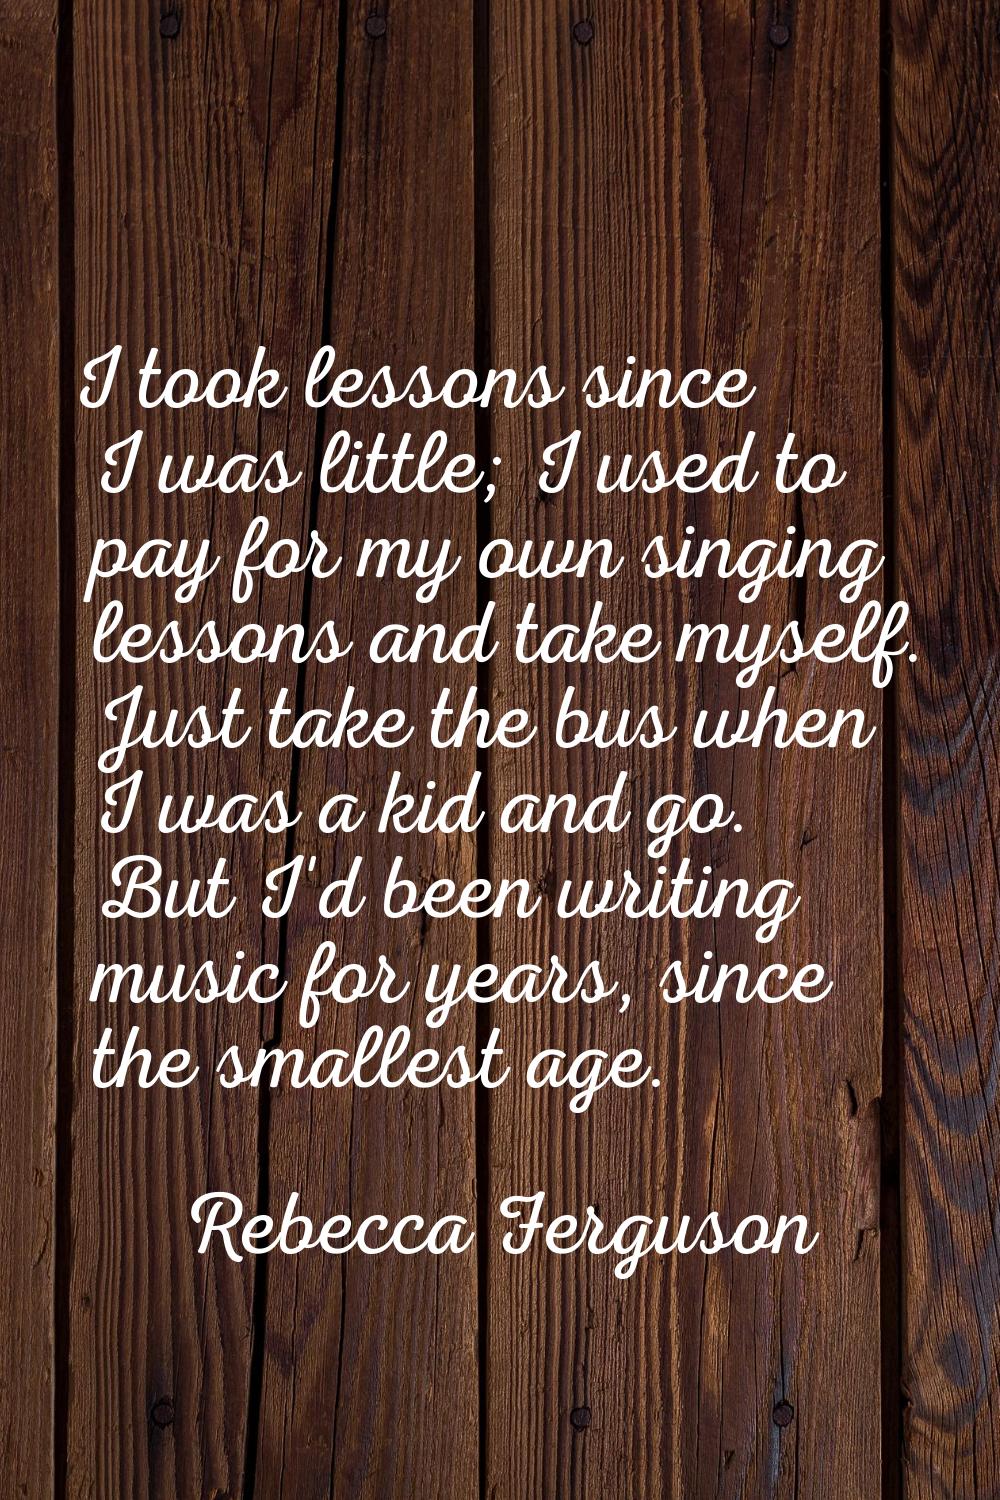 I took lessons since I was little; I used to pay for my own singing lessons and take myself. Just t